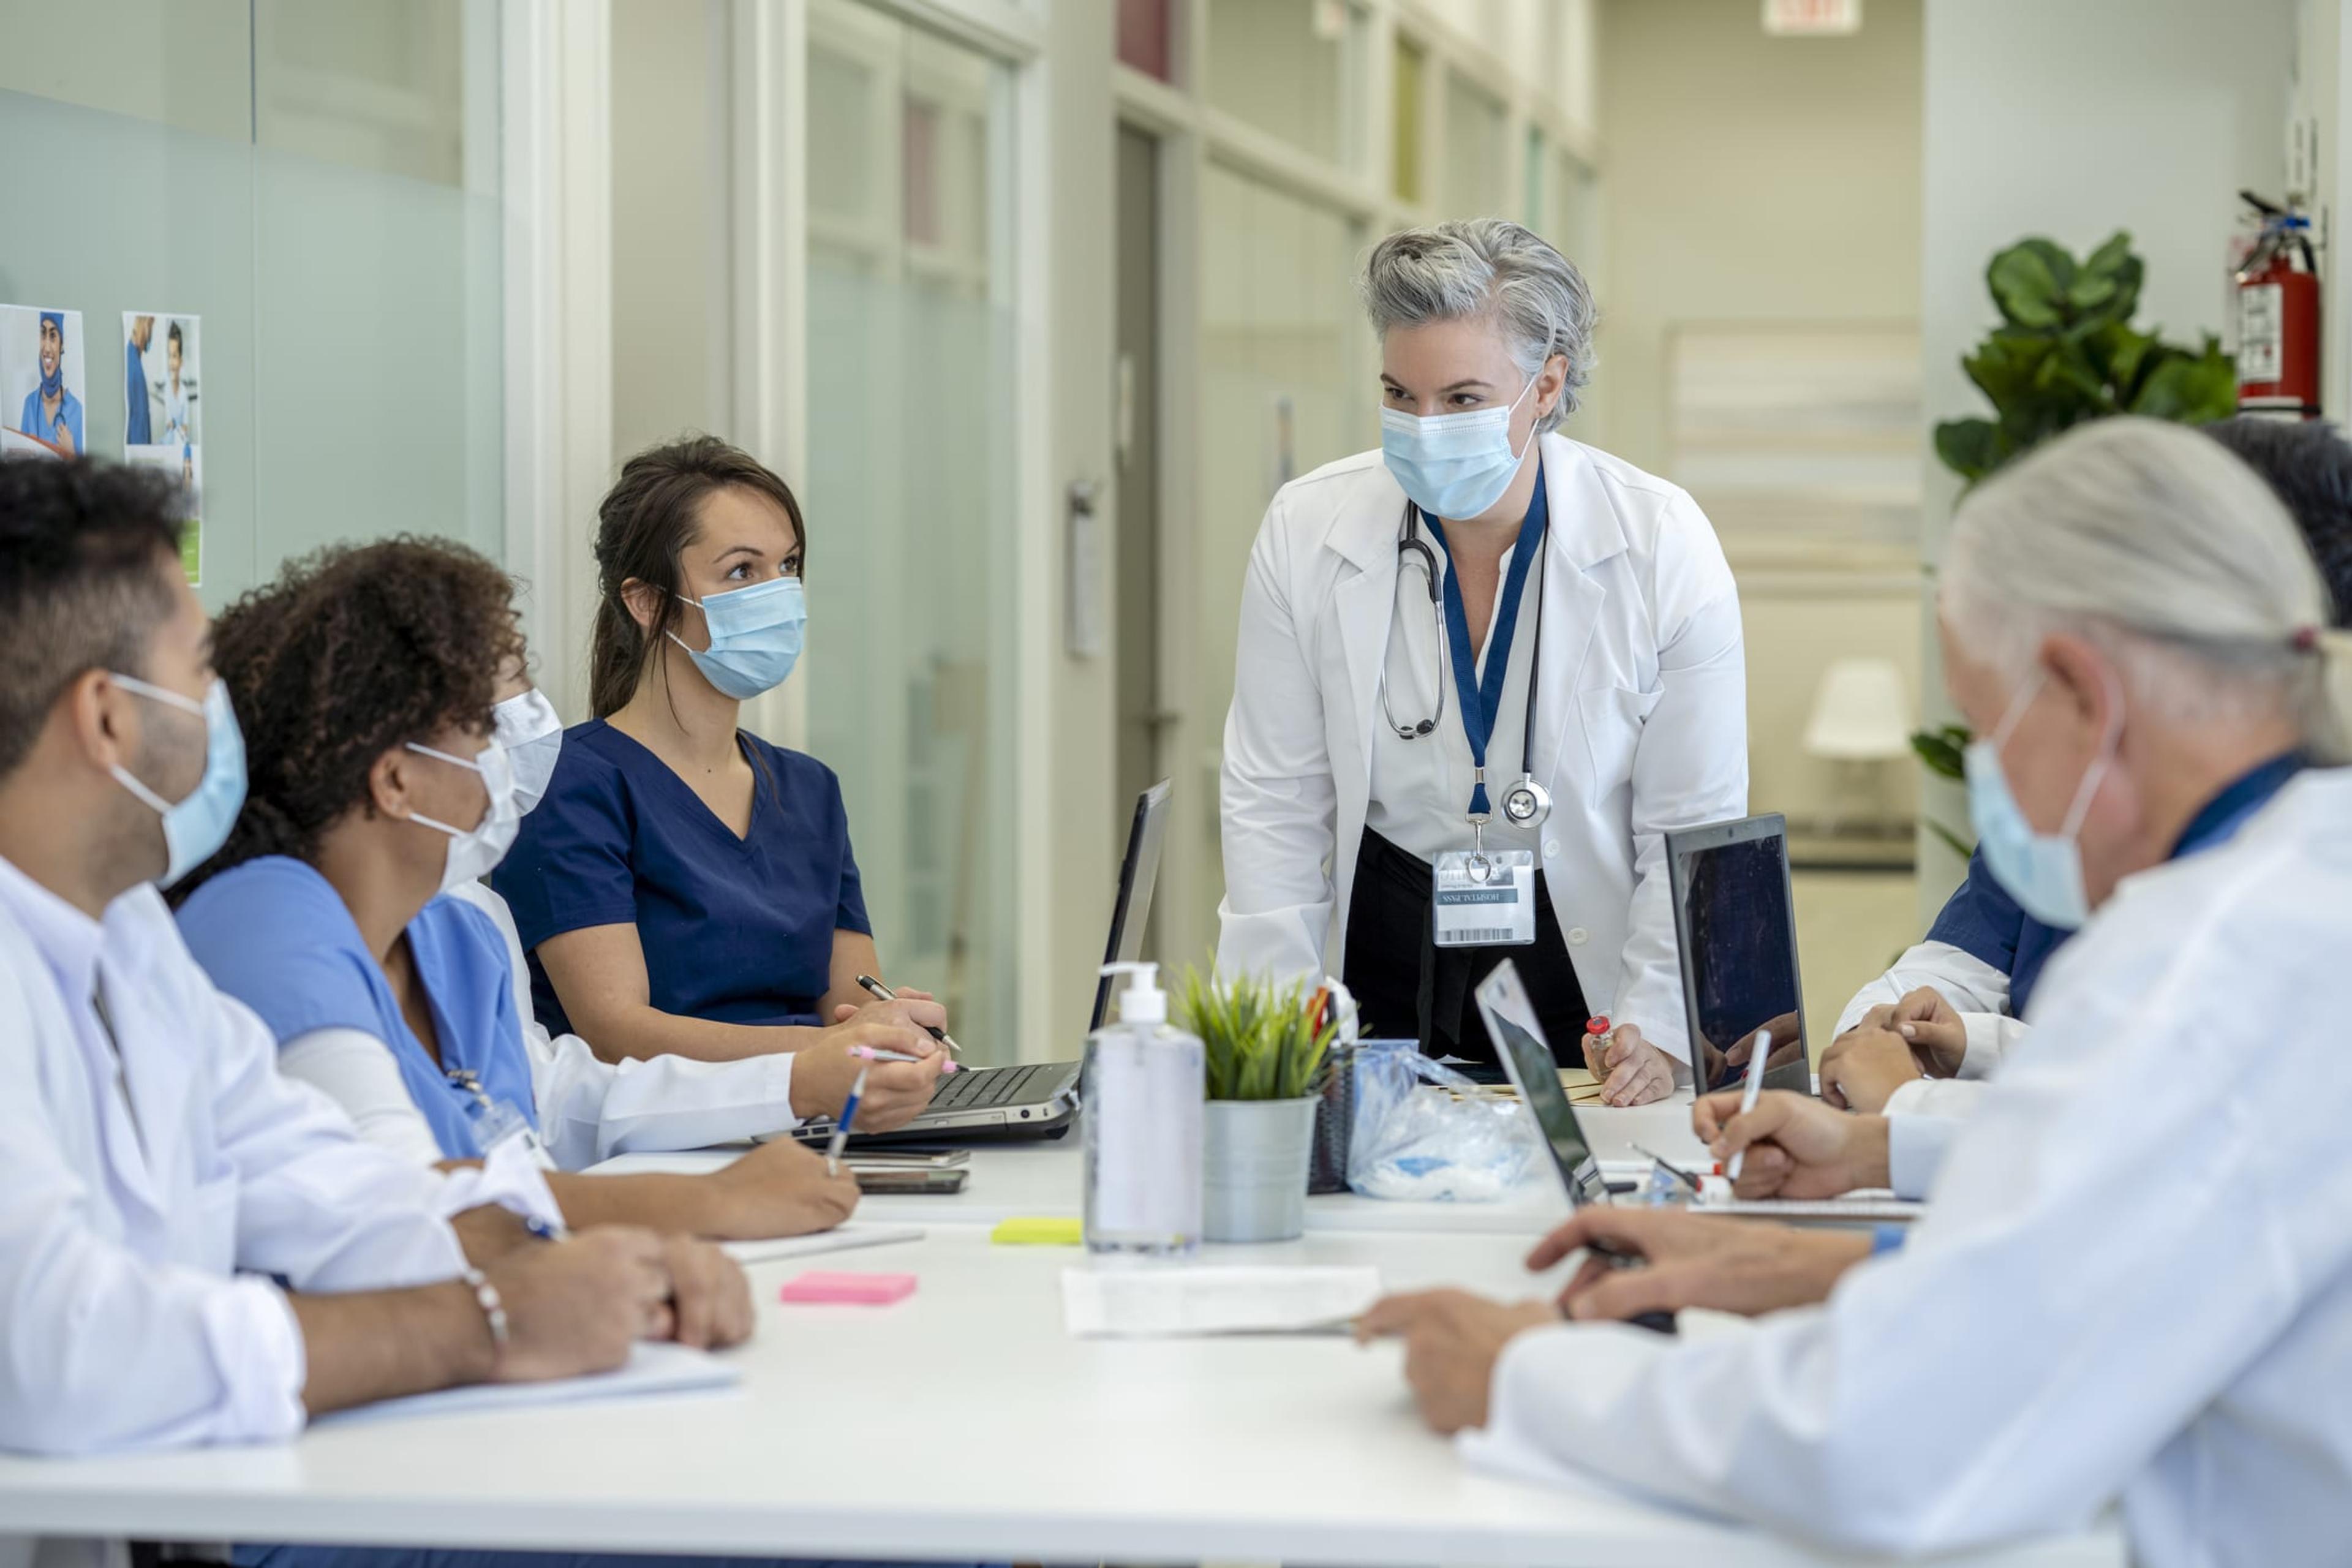 Medical students wearing masks gather at a table